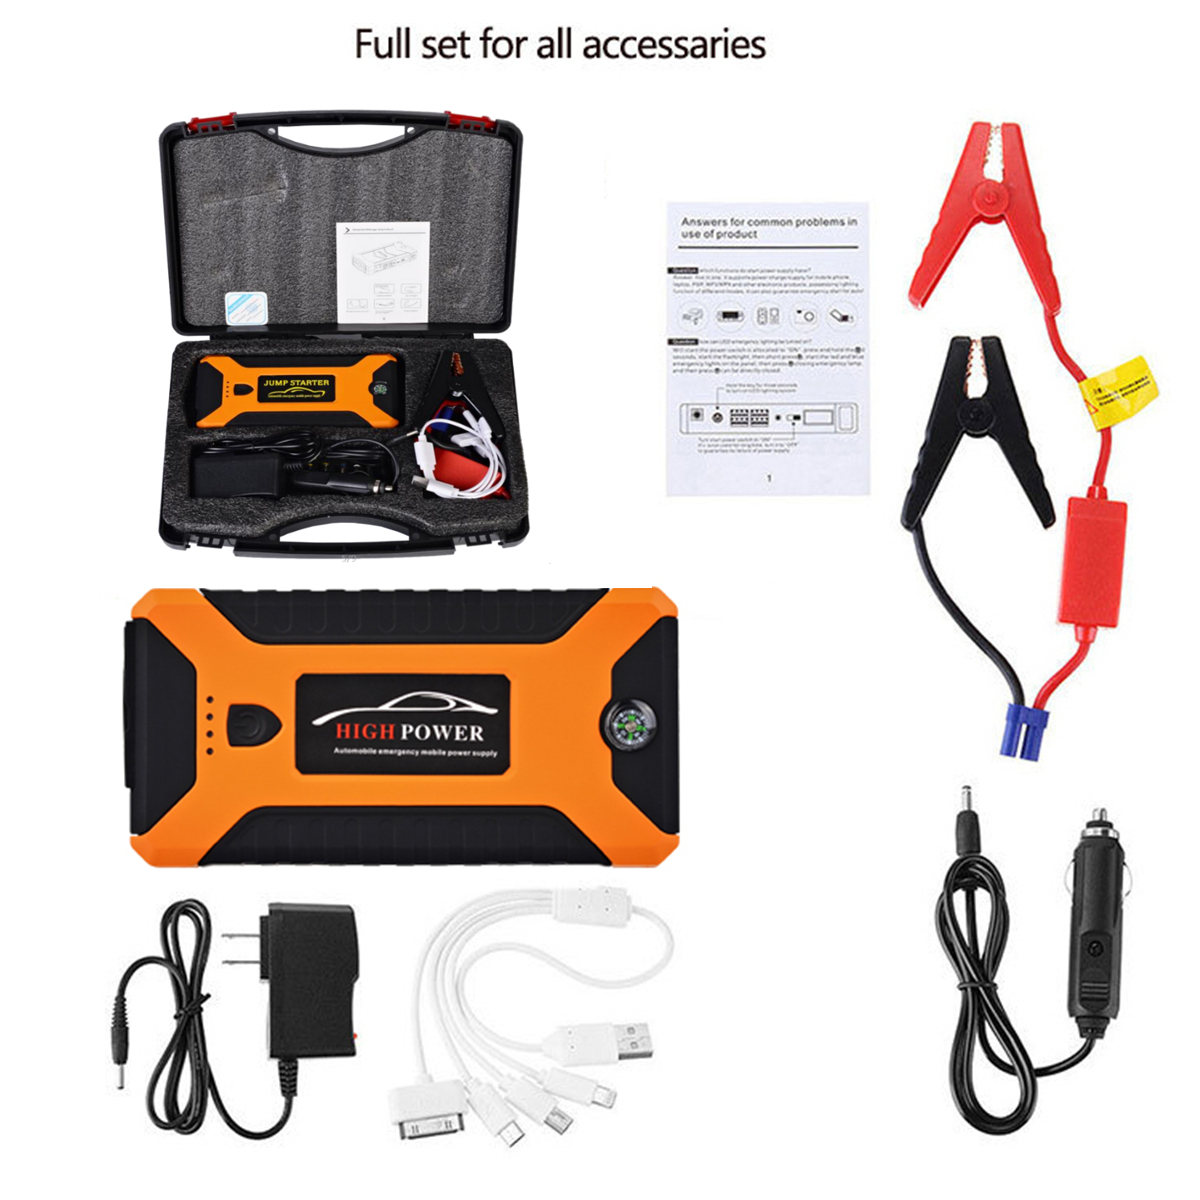 JX27-88000mAh-4USB-Car-Jump-Starter-Pack-Booster-Multifunction-Emergency-Power-Supply-Starter-Charge-1381251-12